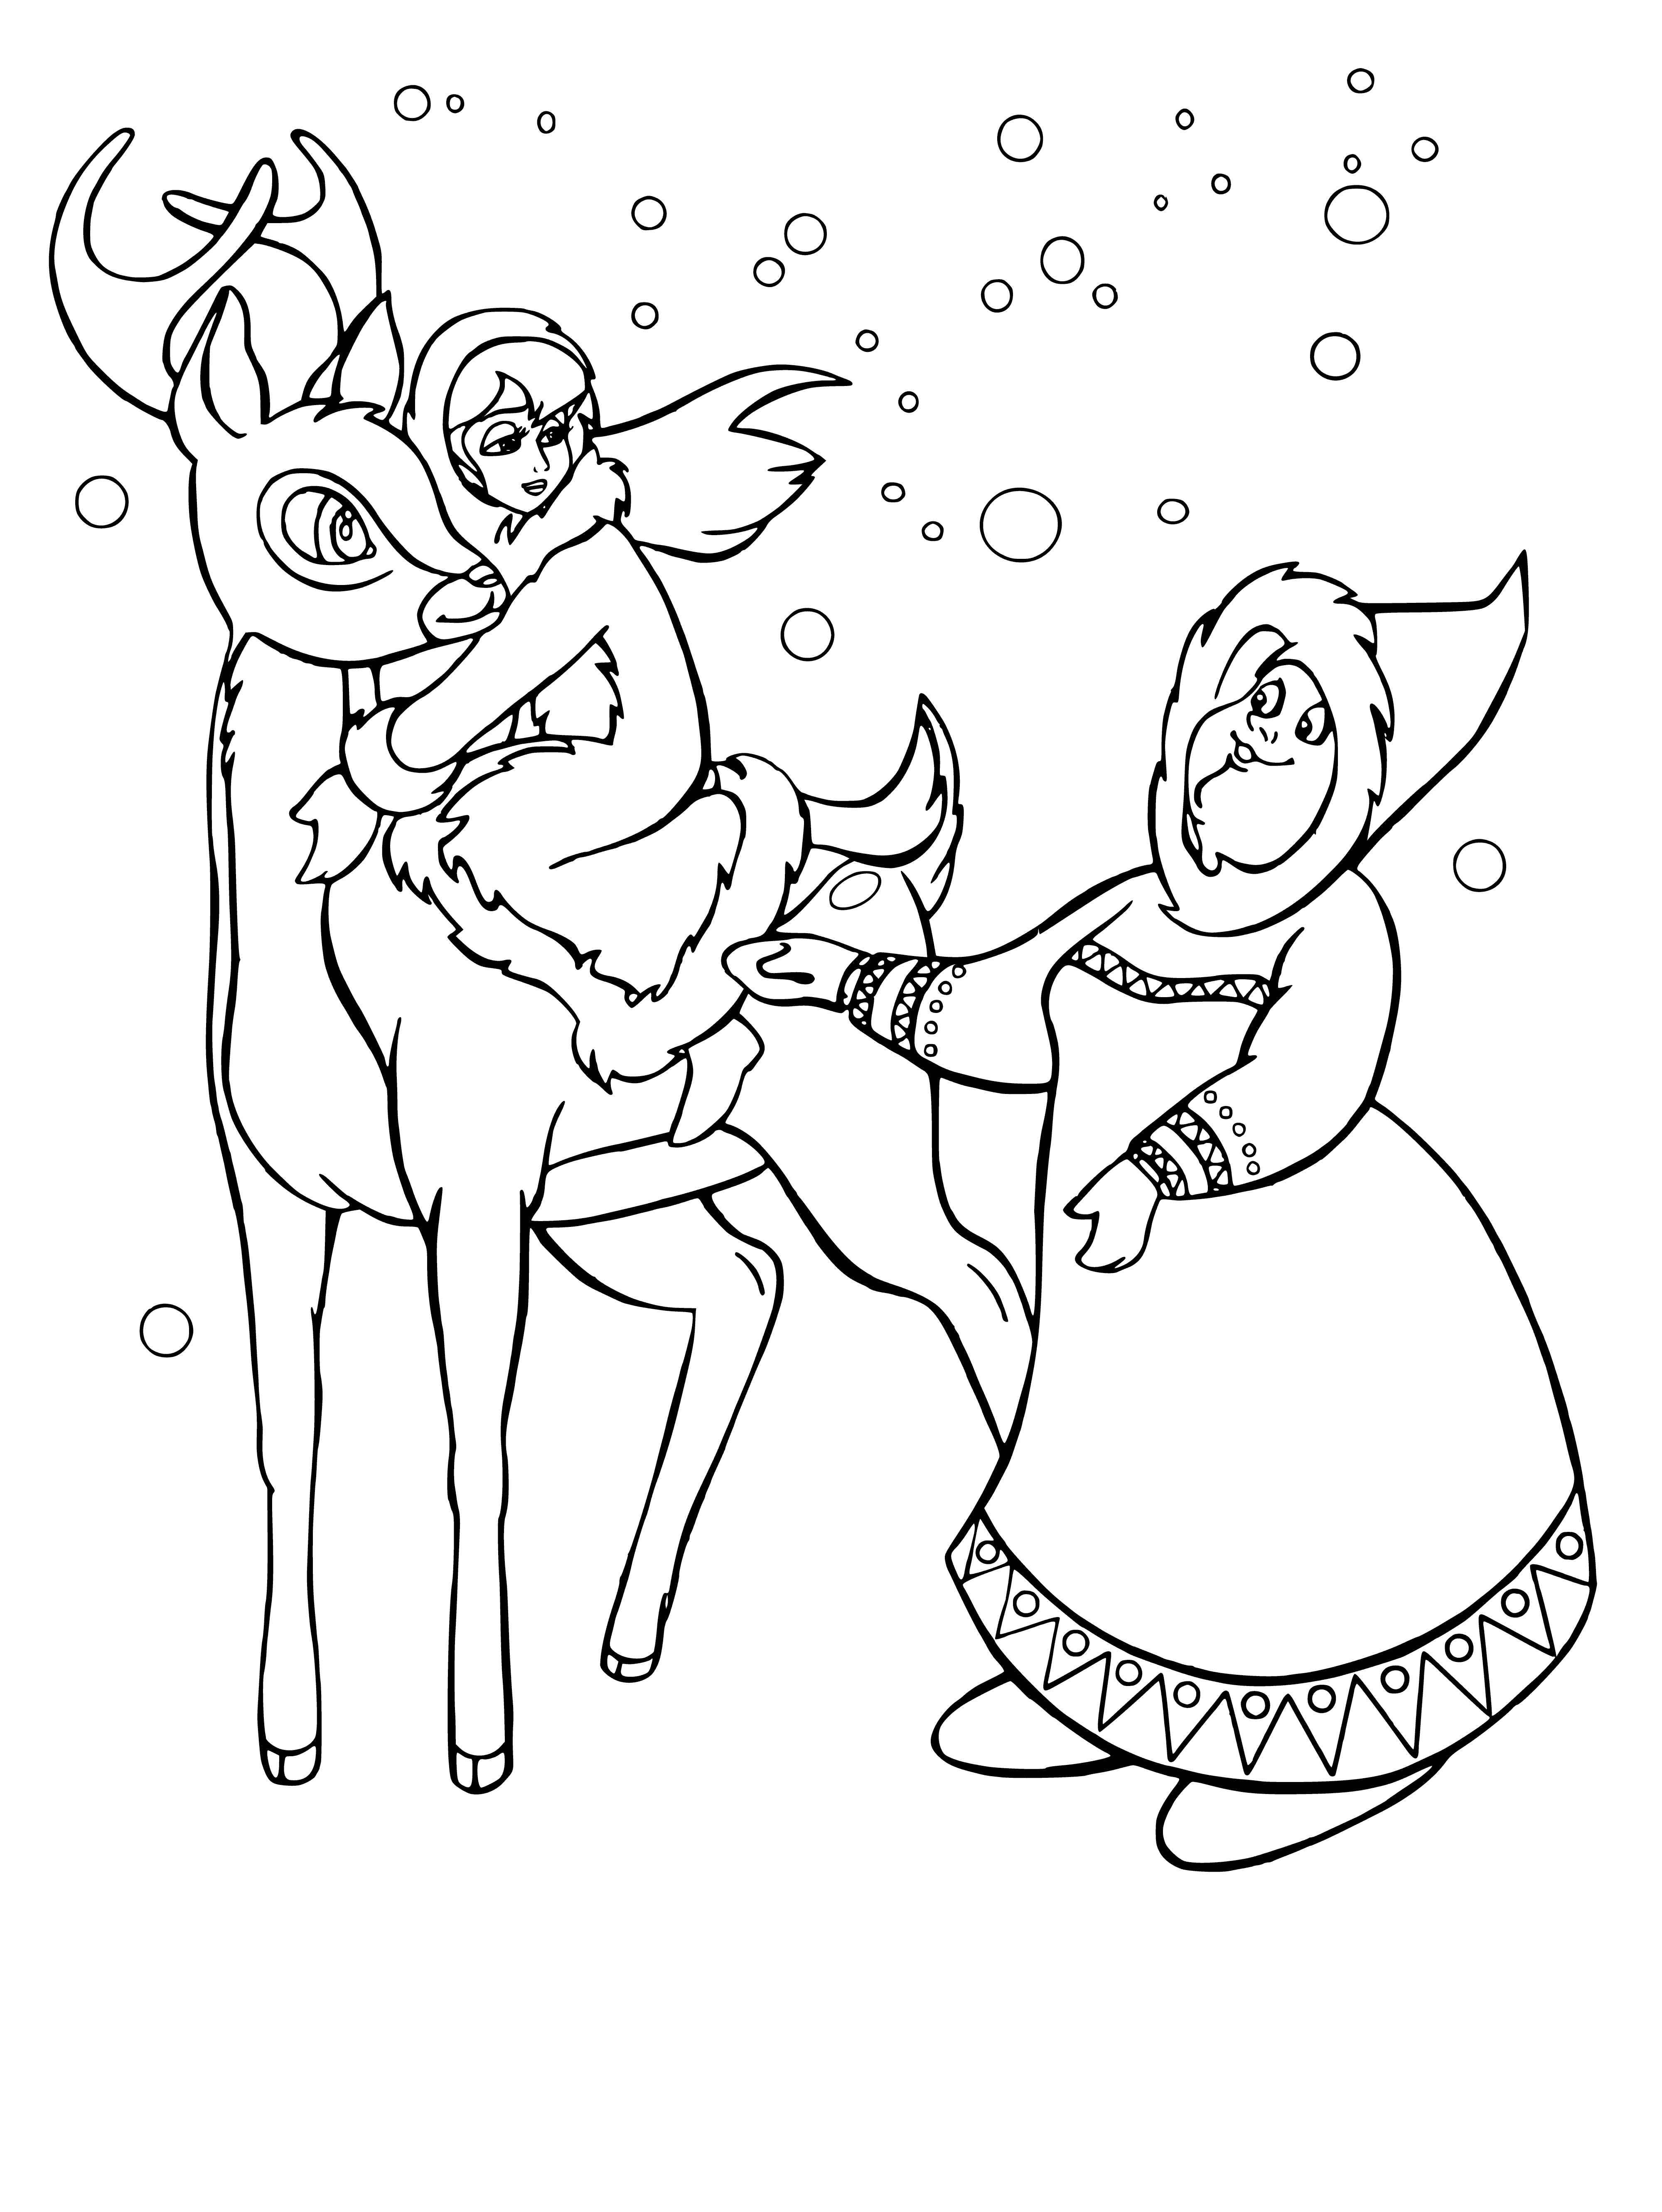 coloring page: People gather 'round a small hut to see a figure in brown fur coat with white beard, staff, bag and 2 reindeer, one with red nose.